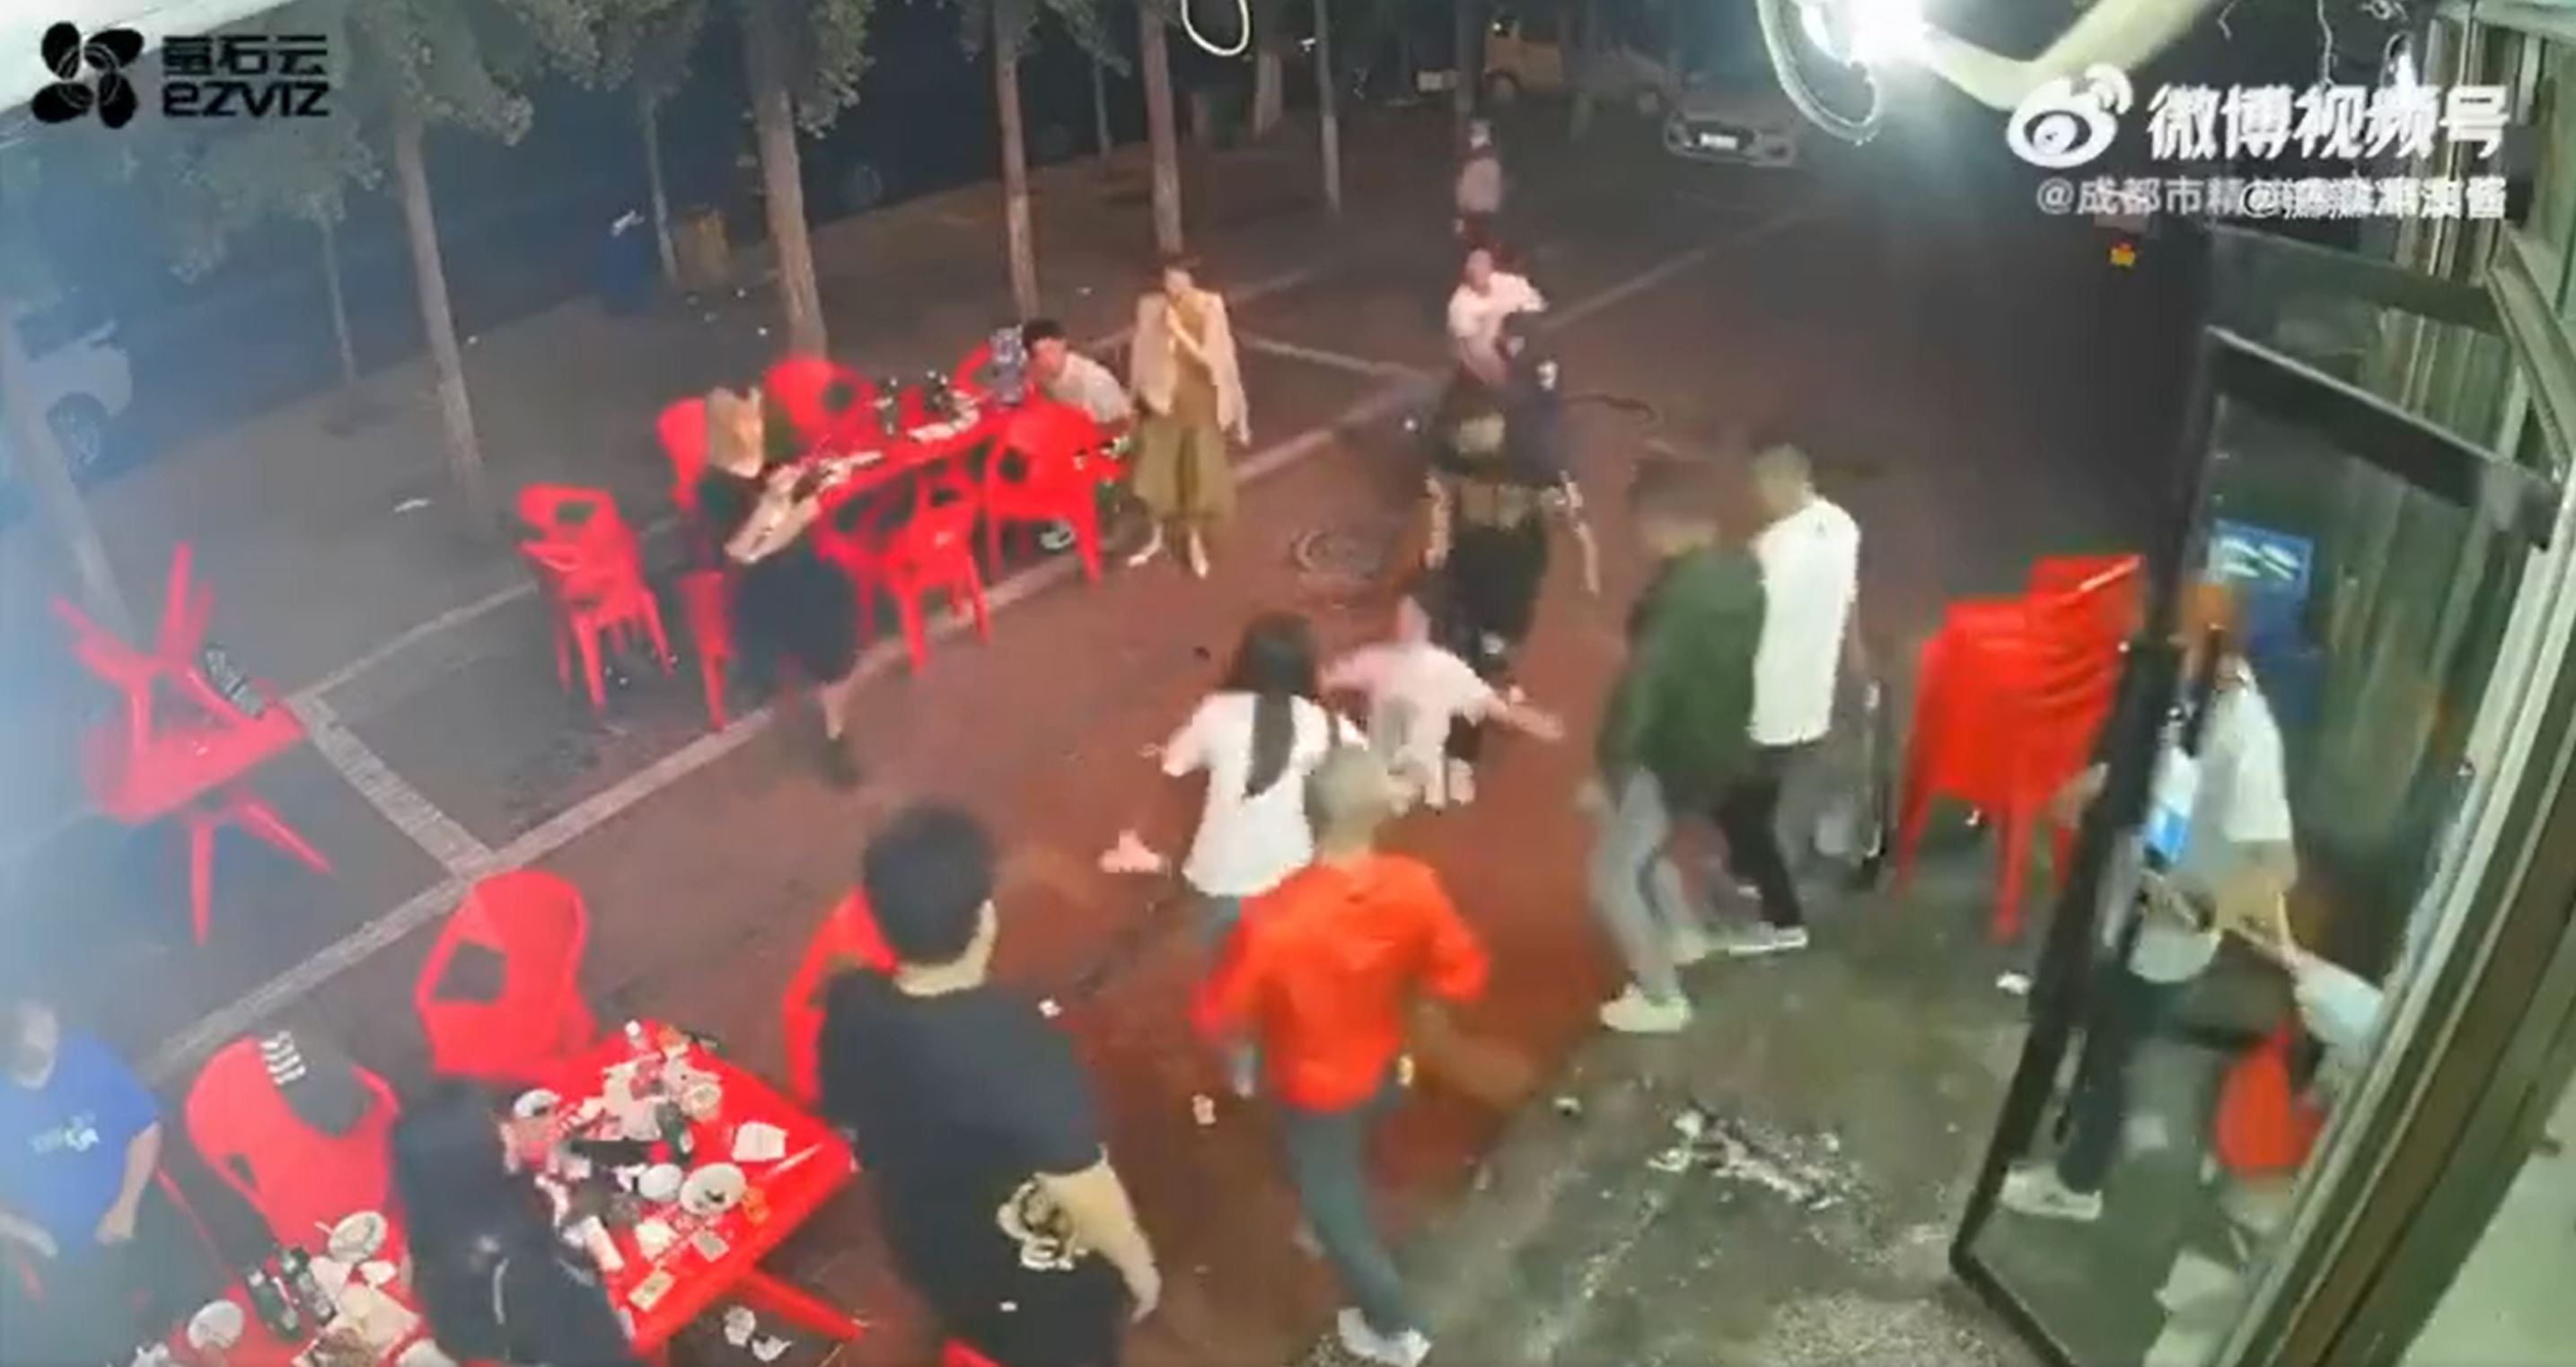 China Investigates Police Over Restaurant Attack on Women That Stunned  Nation - Bloomberg